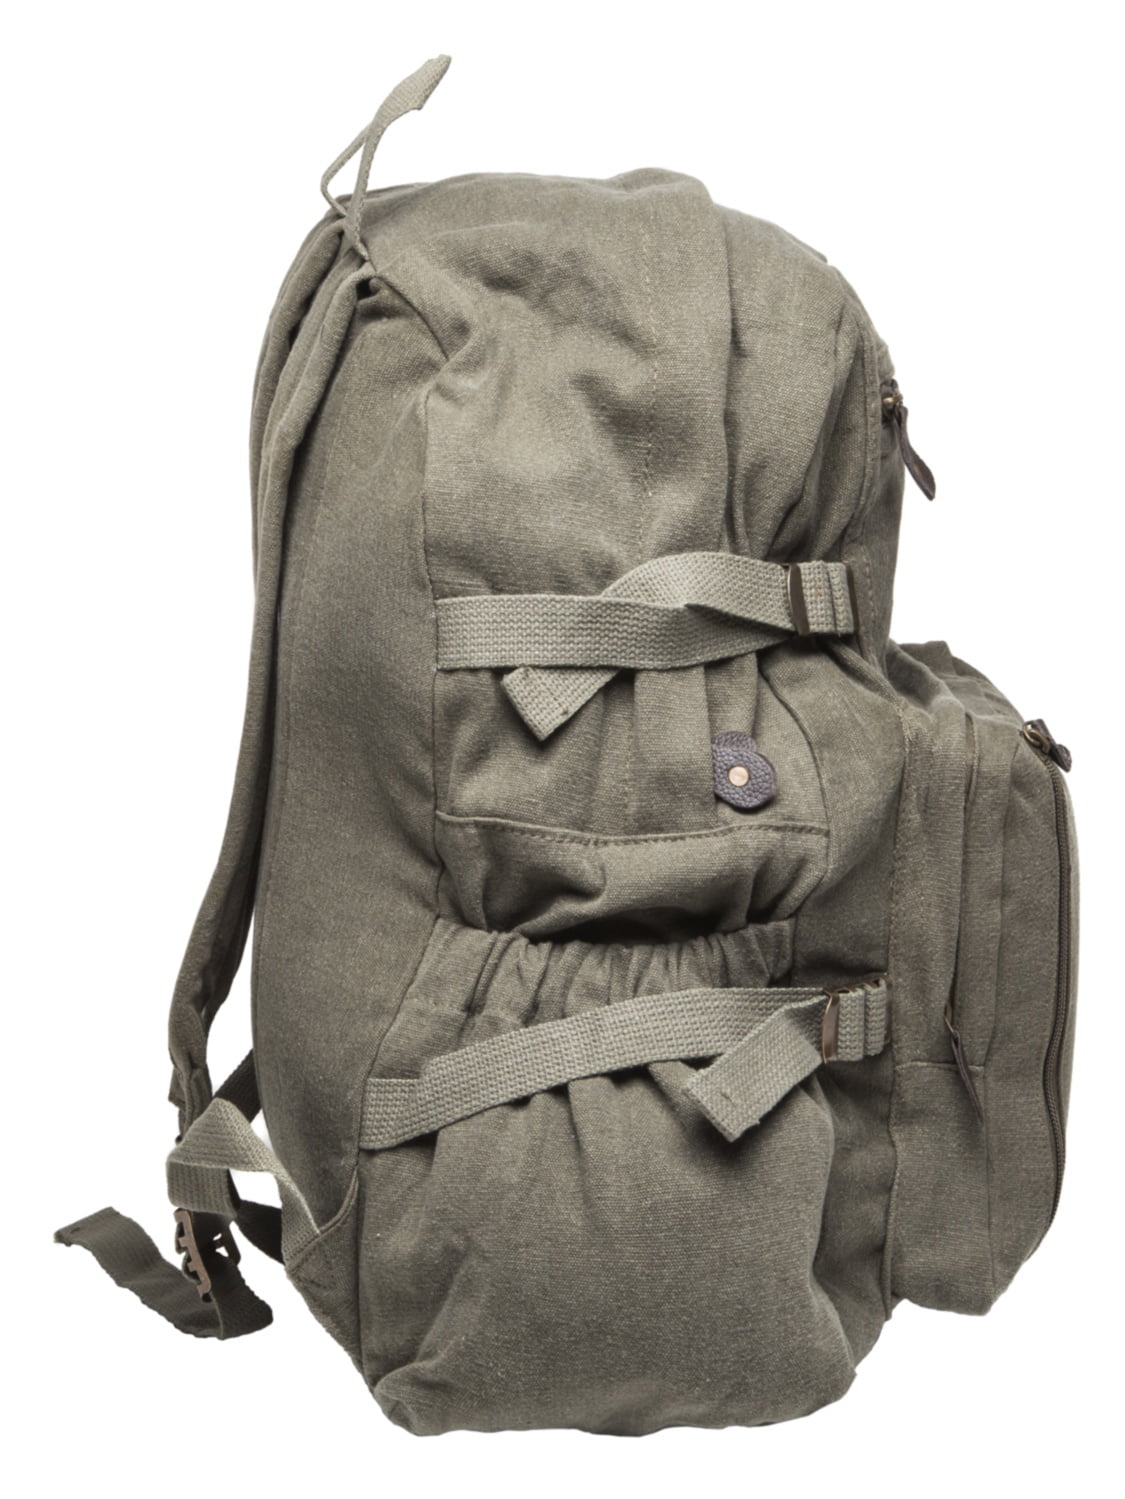 4x4 Off Road Army Sport Heavyweight Canvas Backpack Bag 